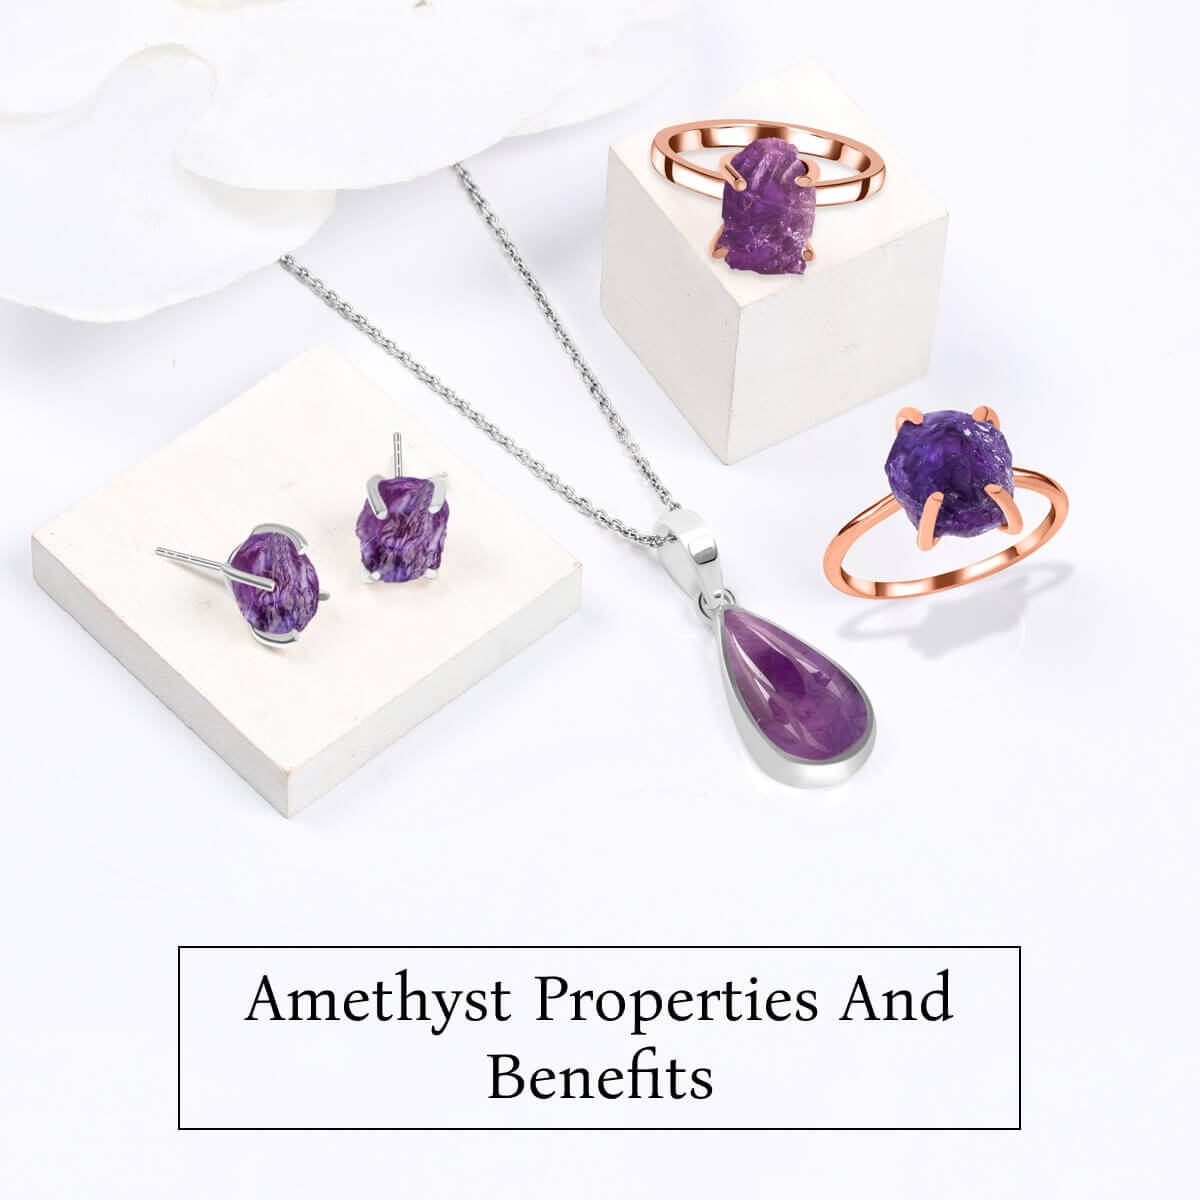 Amethyst Properties And Benefits